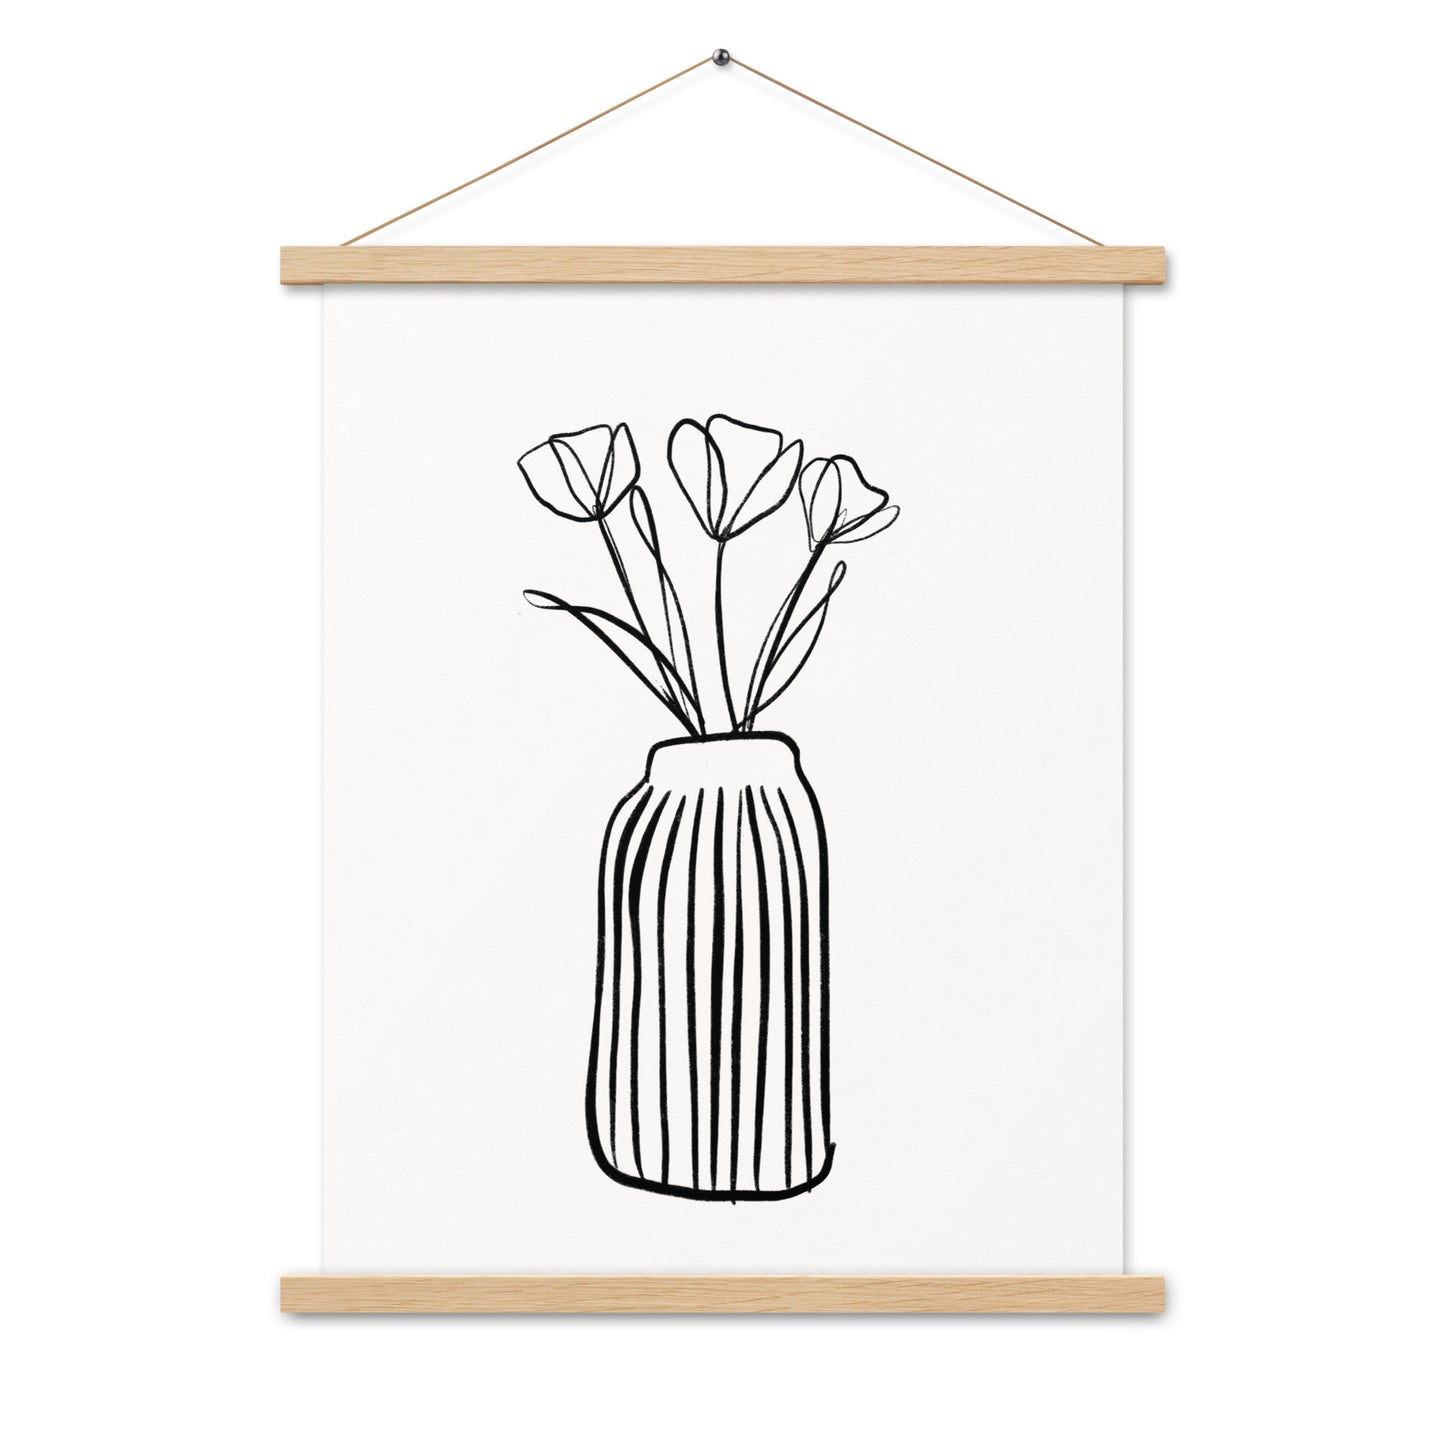 Tulip Flowers in Vase Line Drawing Print with Wooden Hanger